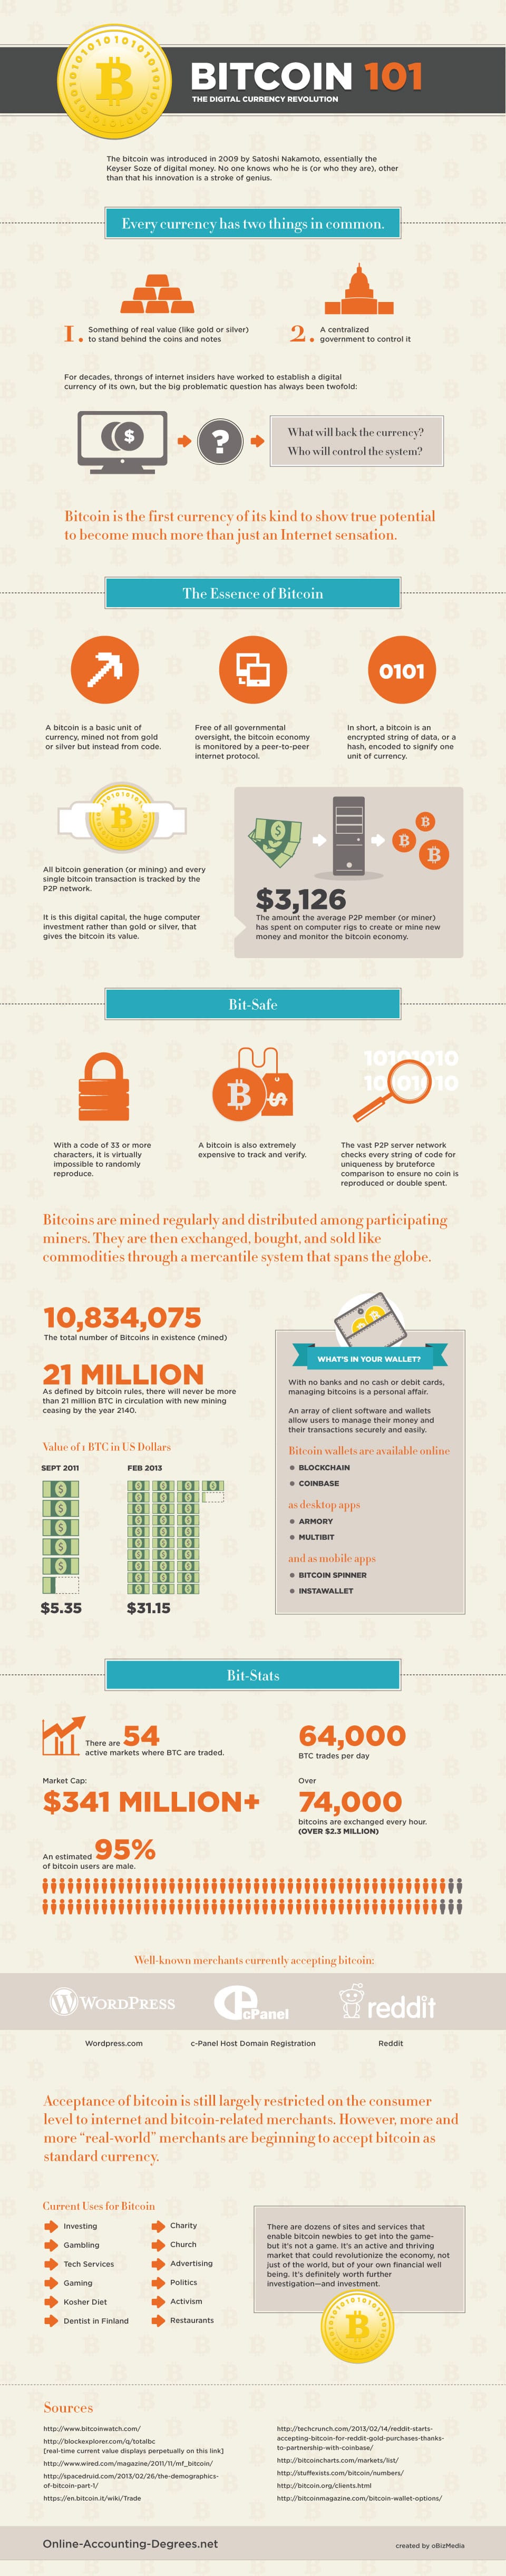 Bitcoin: Rise Of Digital Currency & How It Affects You [Infographic]